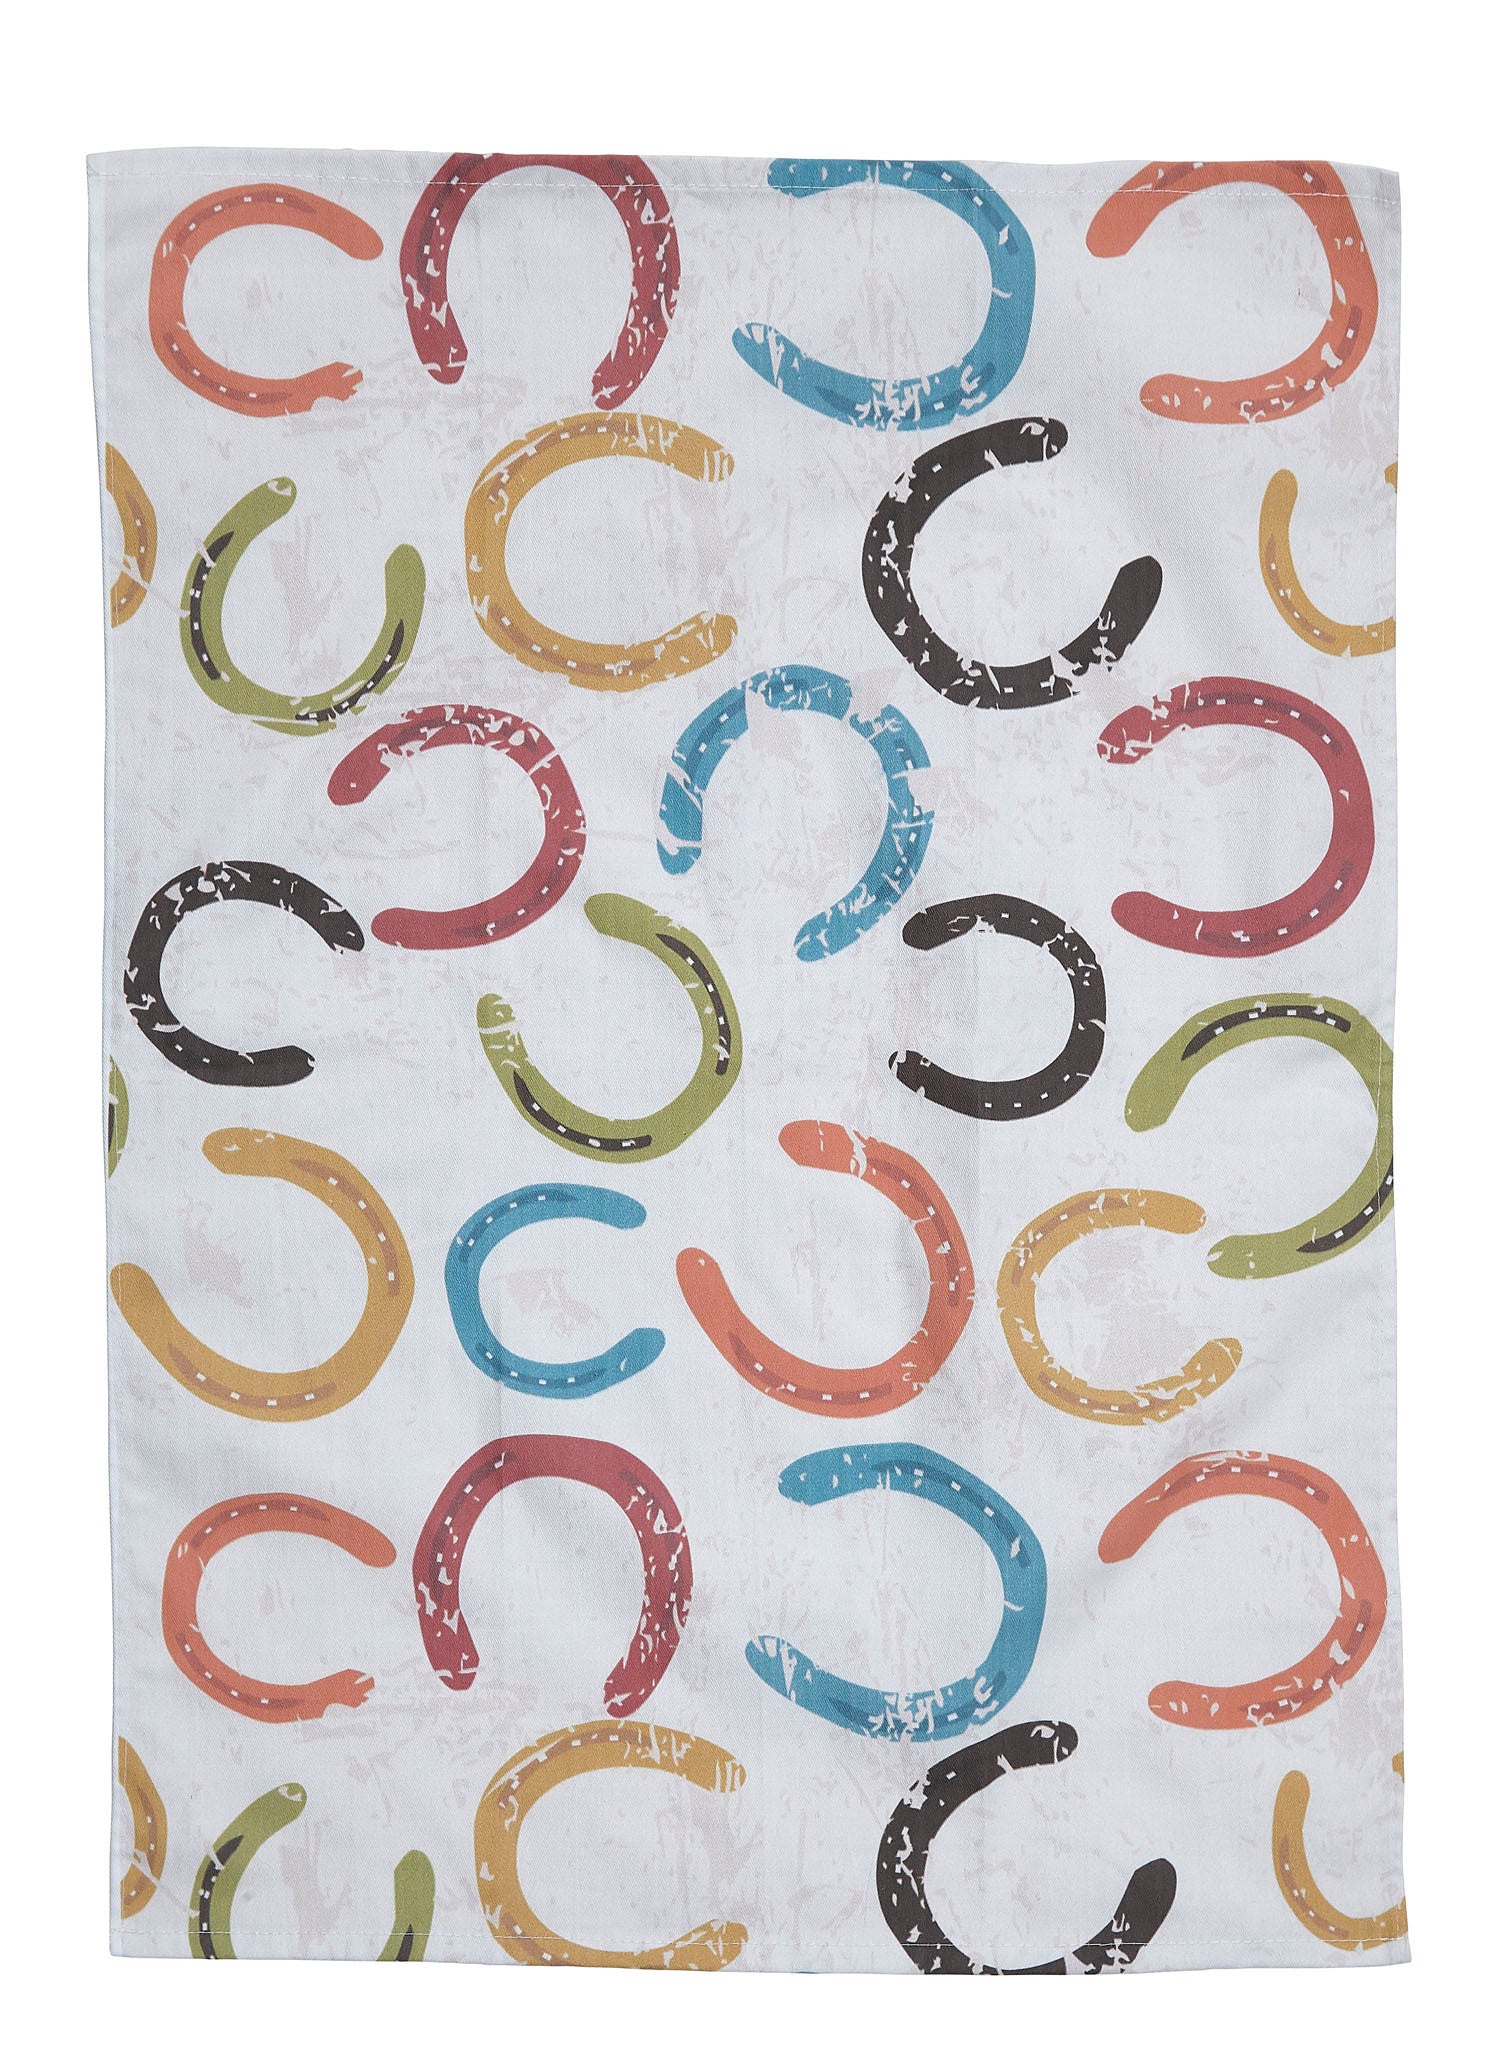 AWST Intl Horse Themed Kitchen Towels- Colorful Horseshoes - Breeches.com